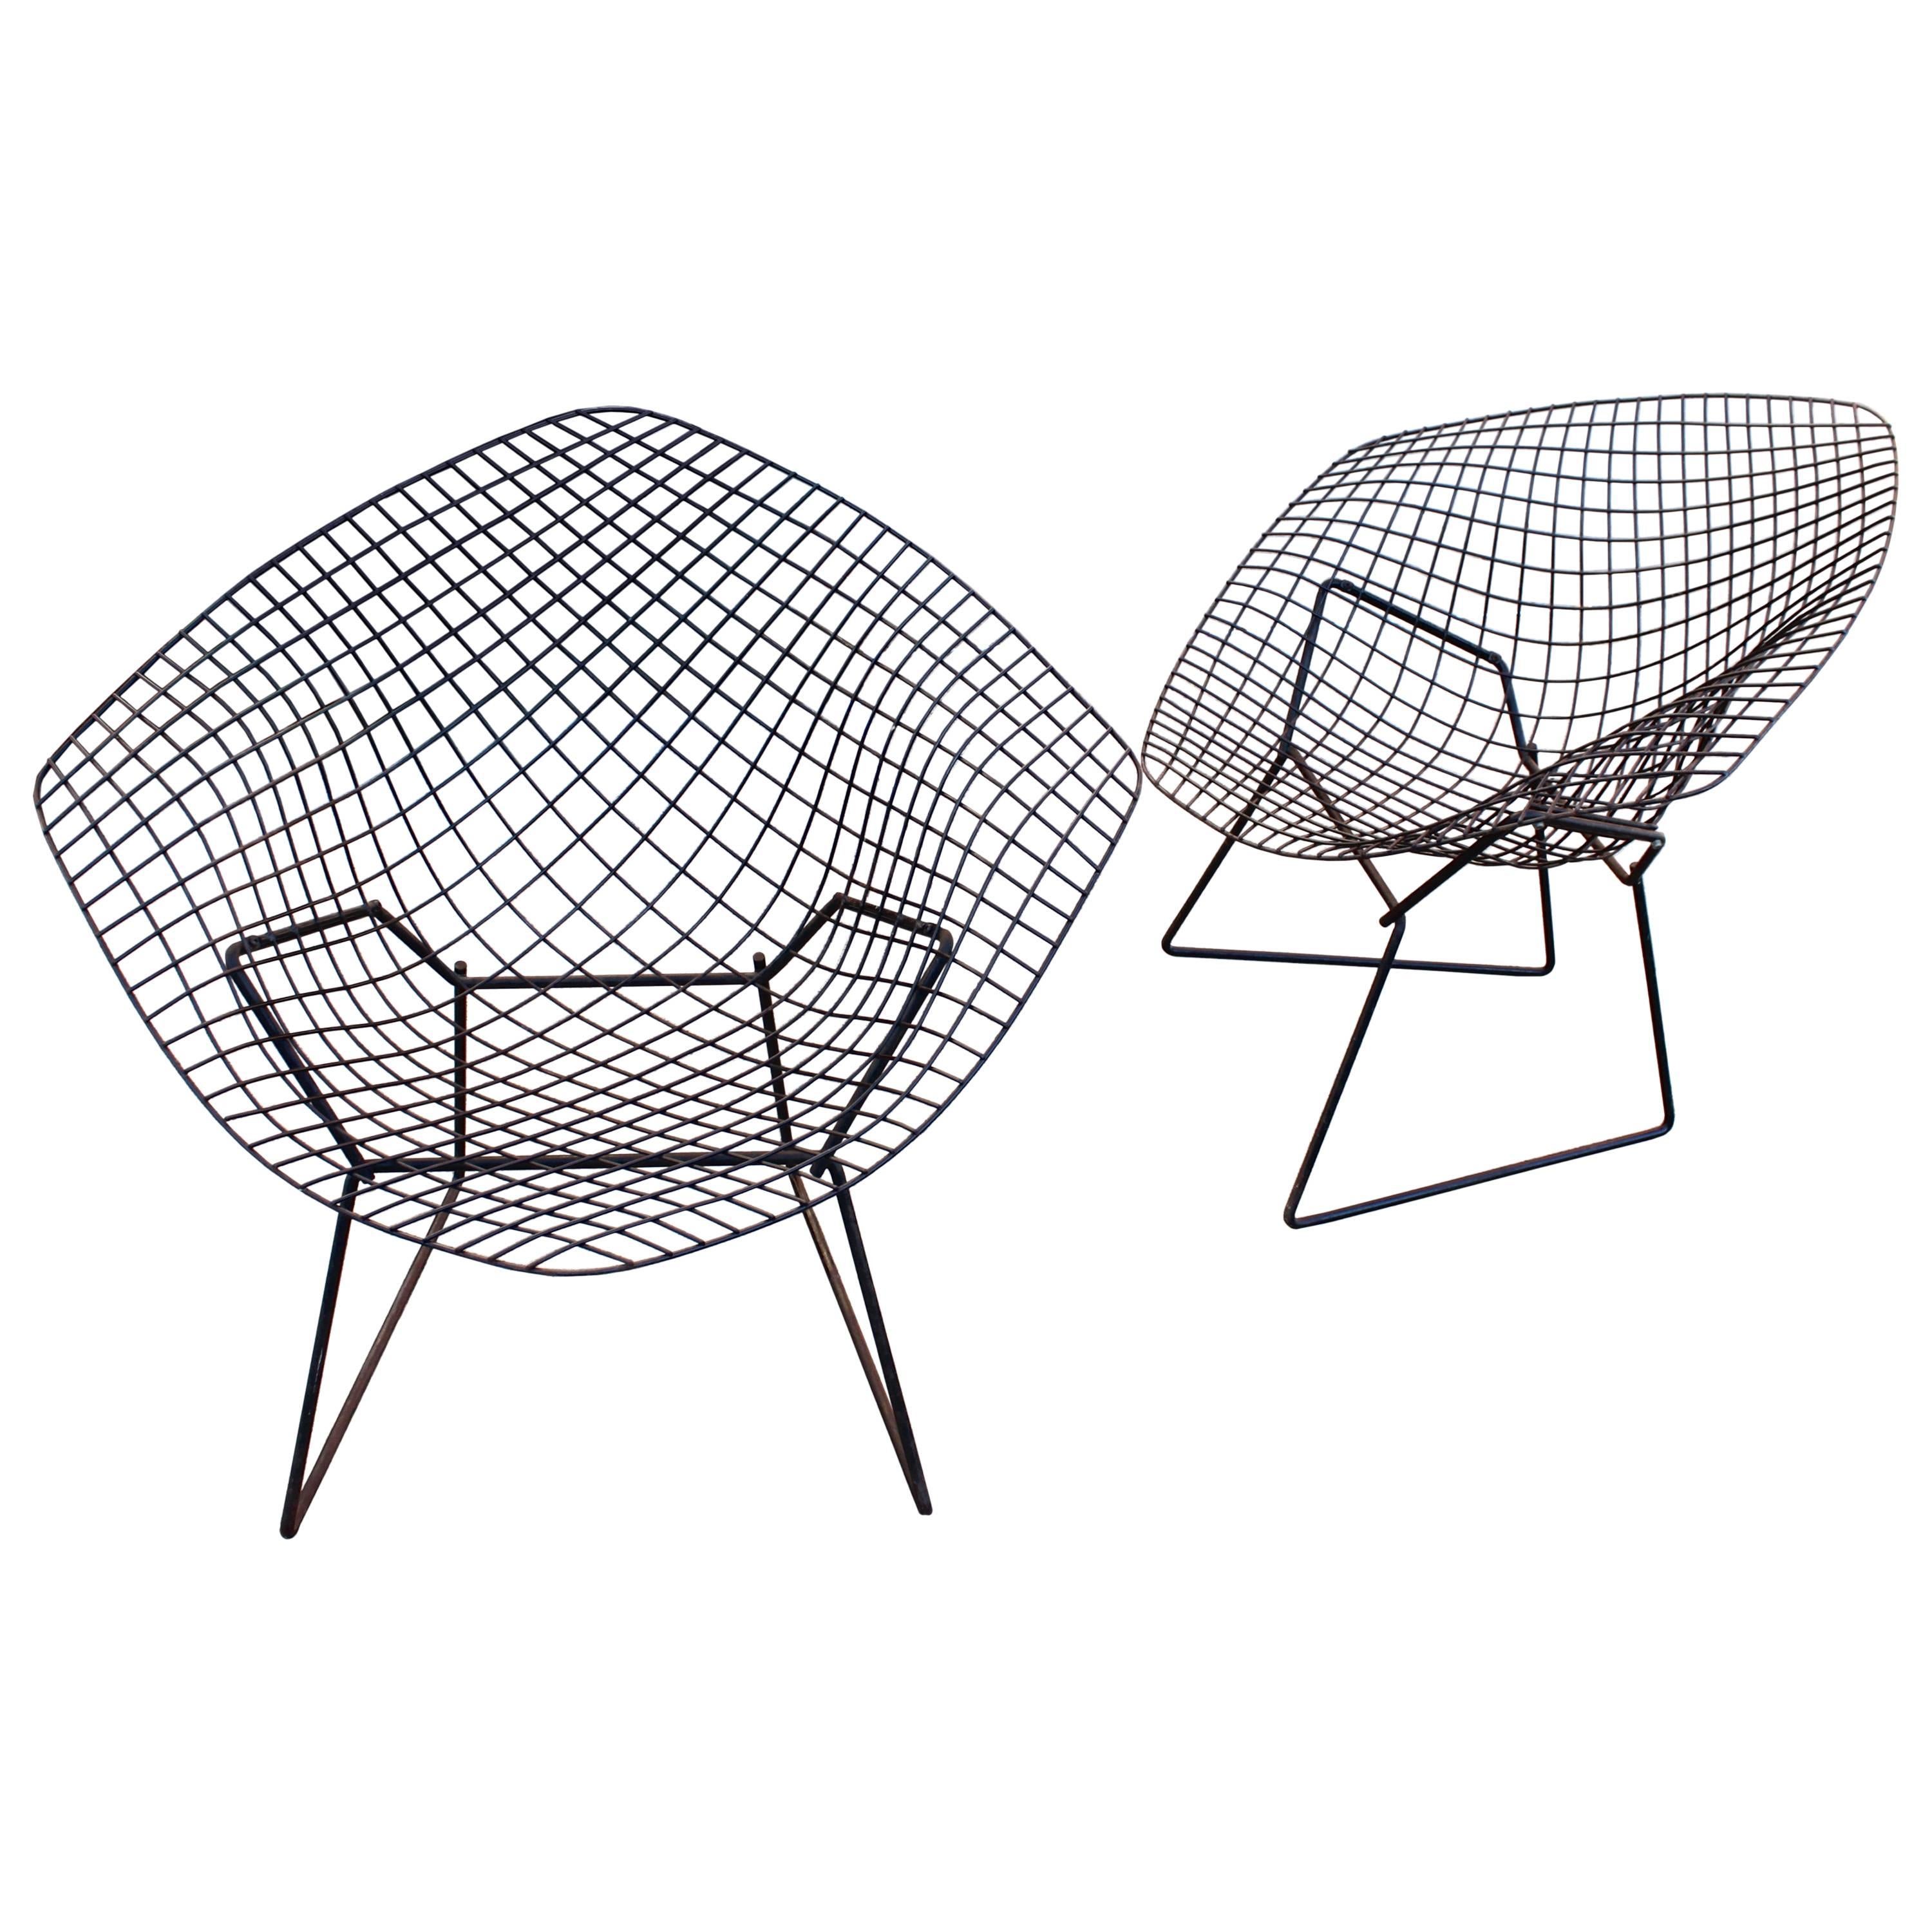 Pair of Bertoia Diamond Chairs by Knoll with Original Shells